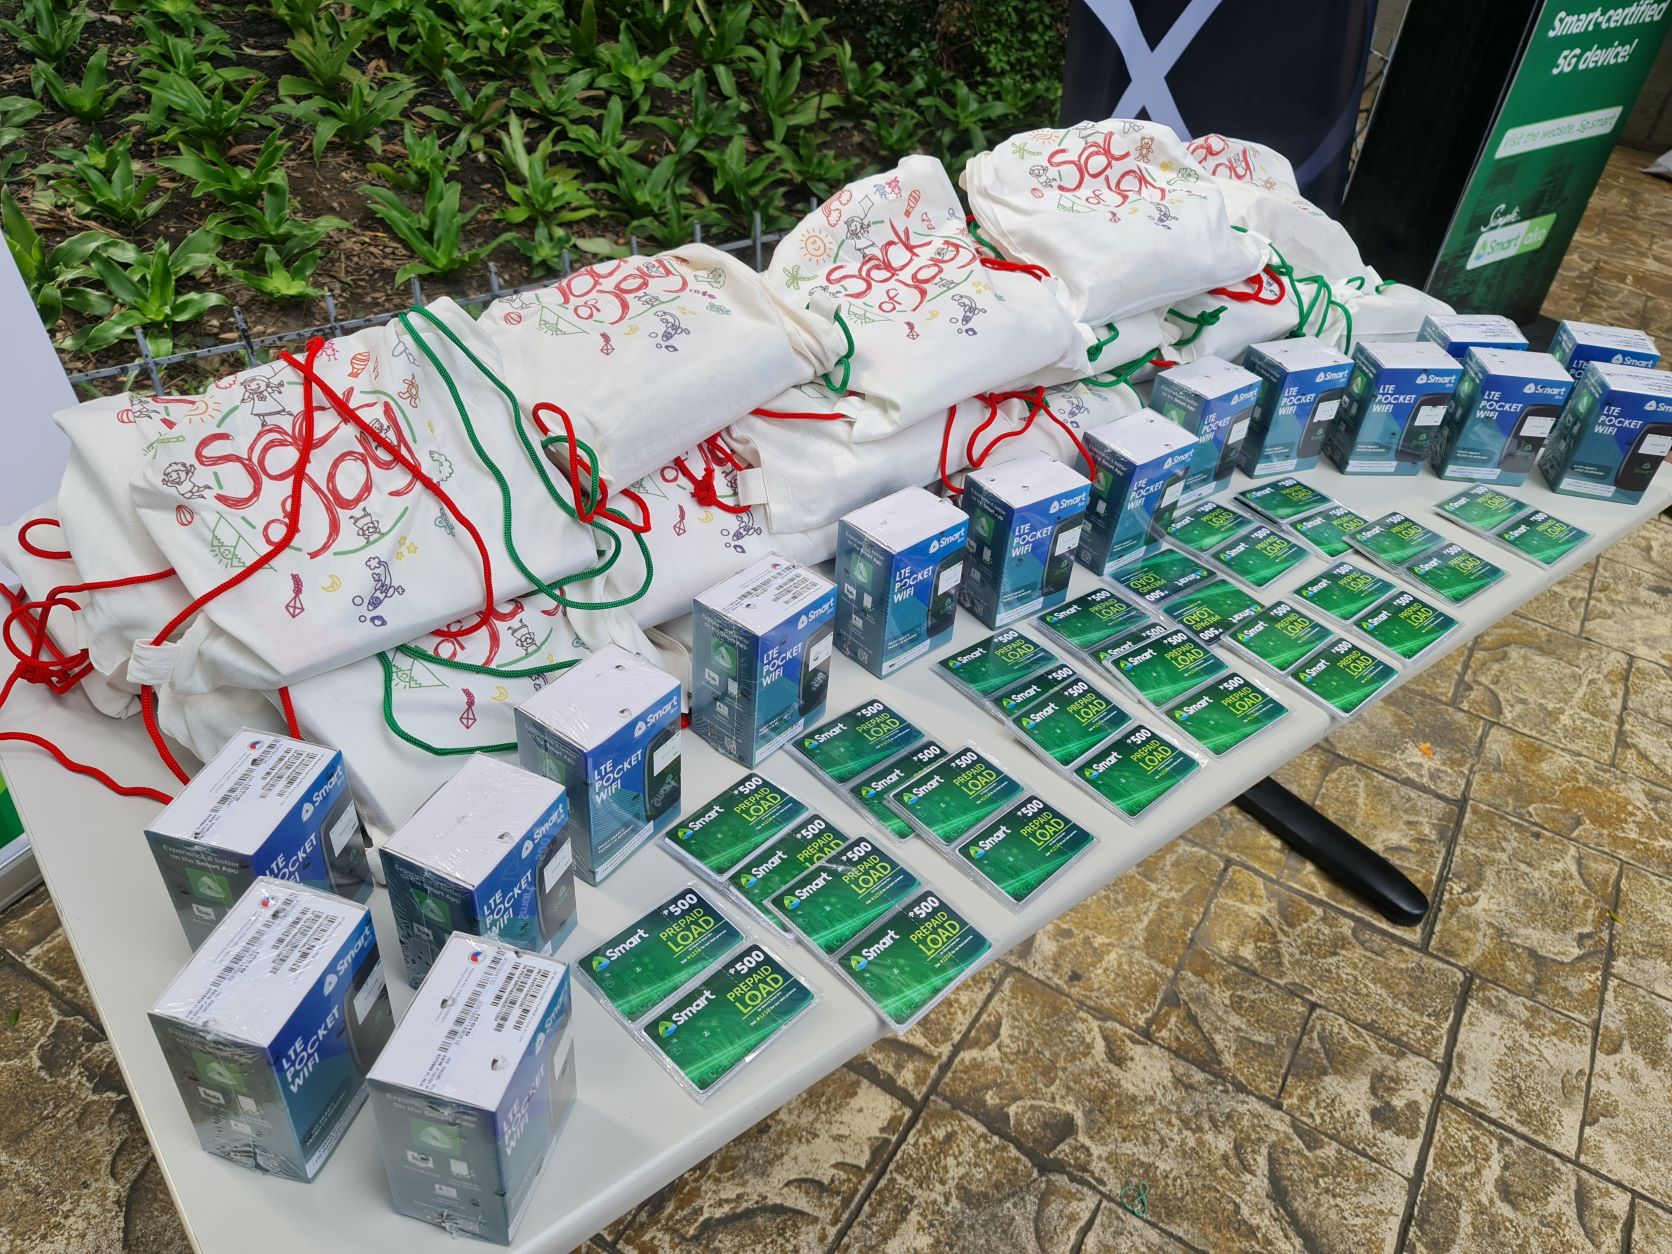 “Sacks of Joy” as the PLDT-Smart Foundation (PSF) call the curation of packed bags filled with school materials, together with the Smart pocket WiFi devices, are the vision of this partnership.